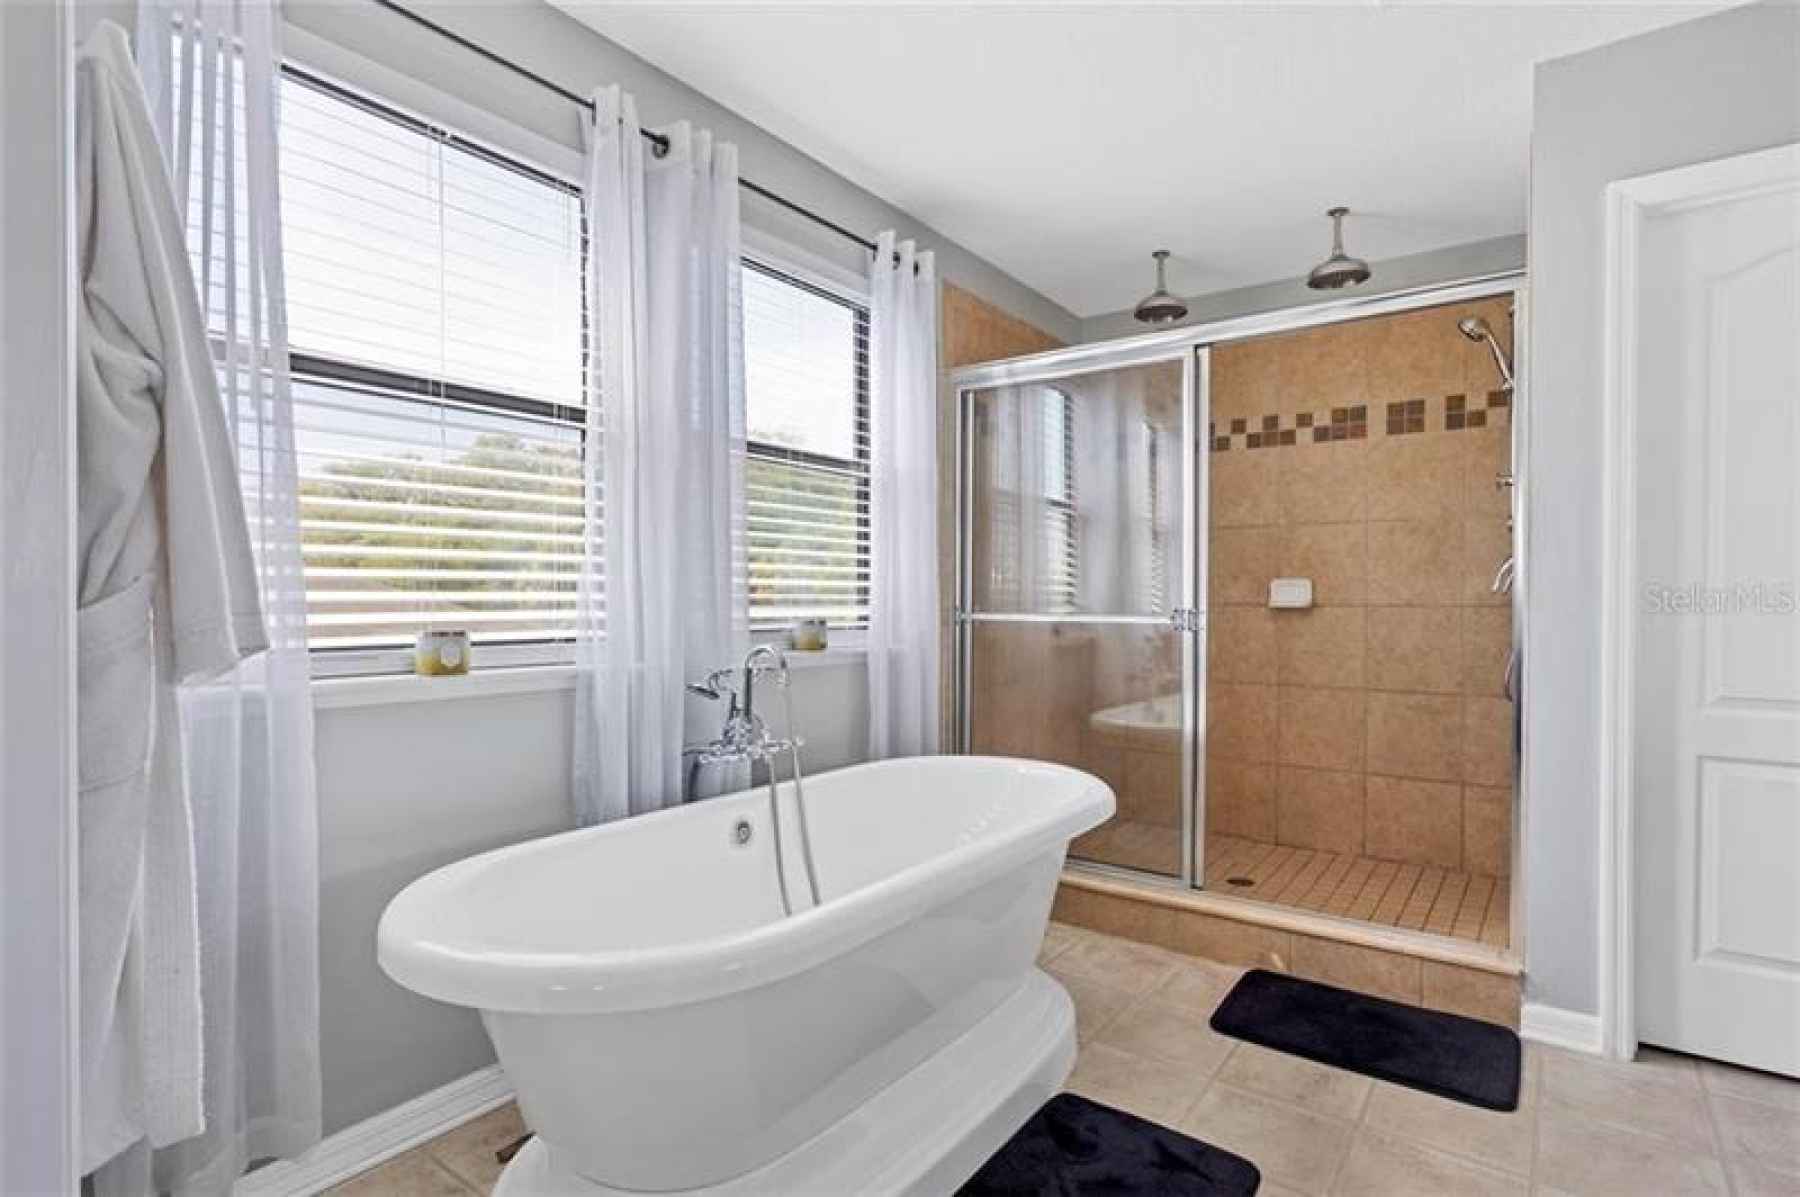 Master bath with free-standing tub & shower.